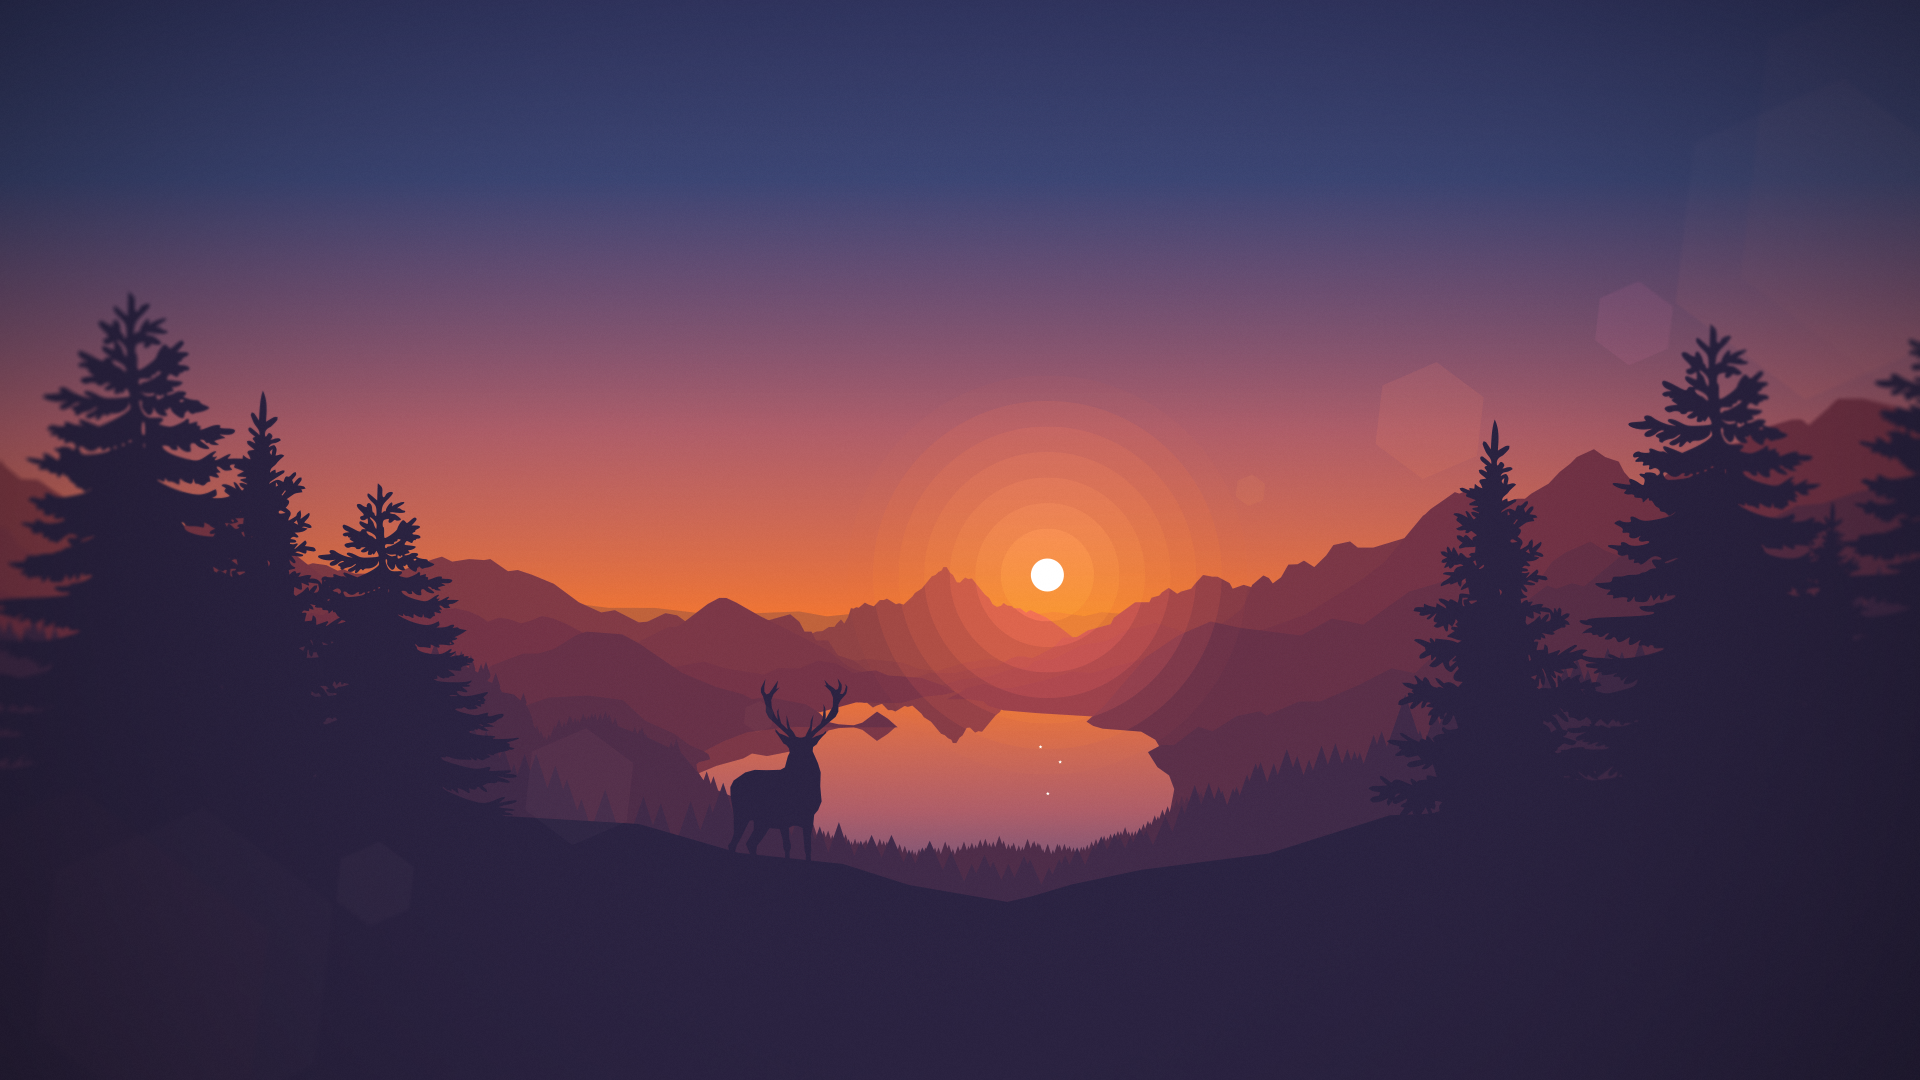 Wallpaper, sunset, drawing, animals, lake, landscape, deer, artwork, silhouette, nature, digital art, pine trees, hills, clear sky, vector, warm colors, Firewatch, video games, Lago di Scanno 1920x1080